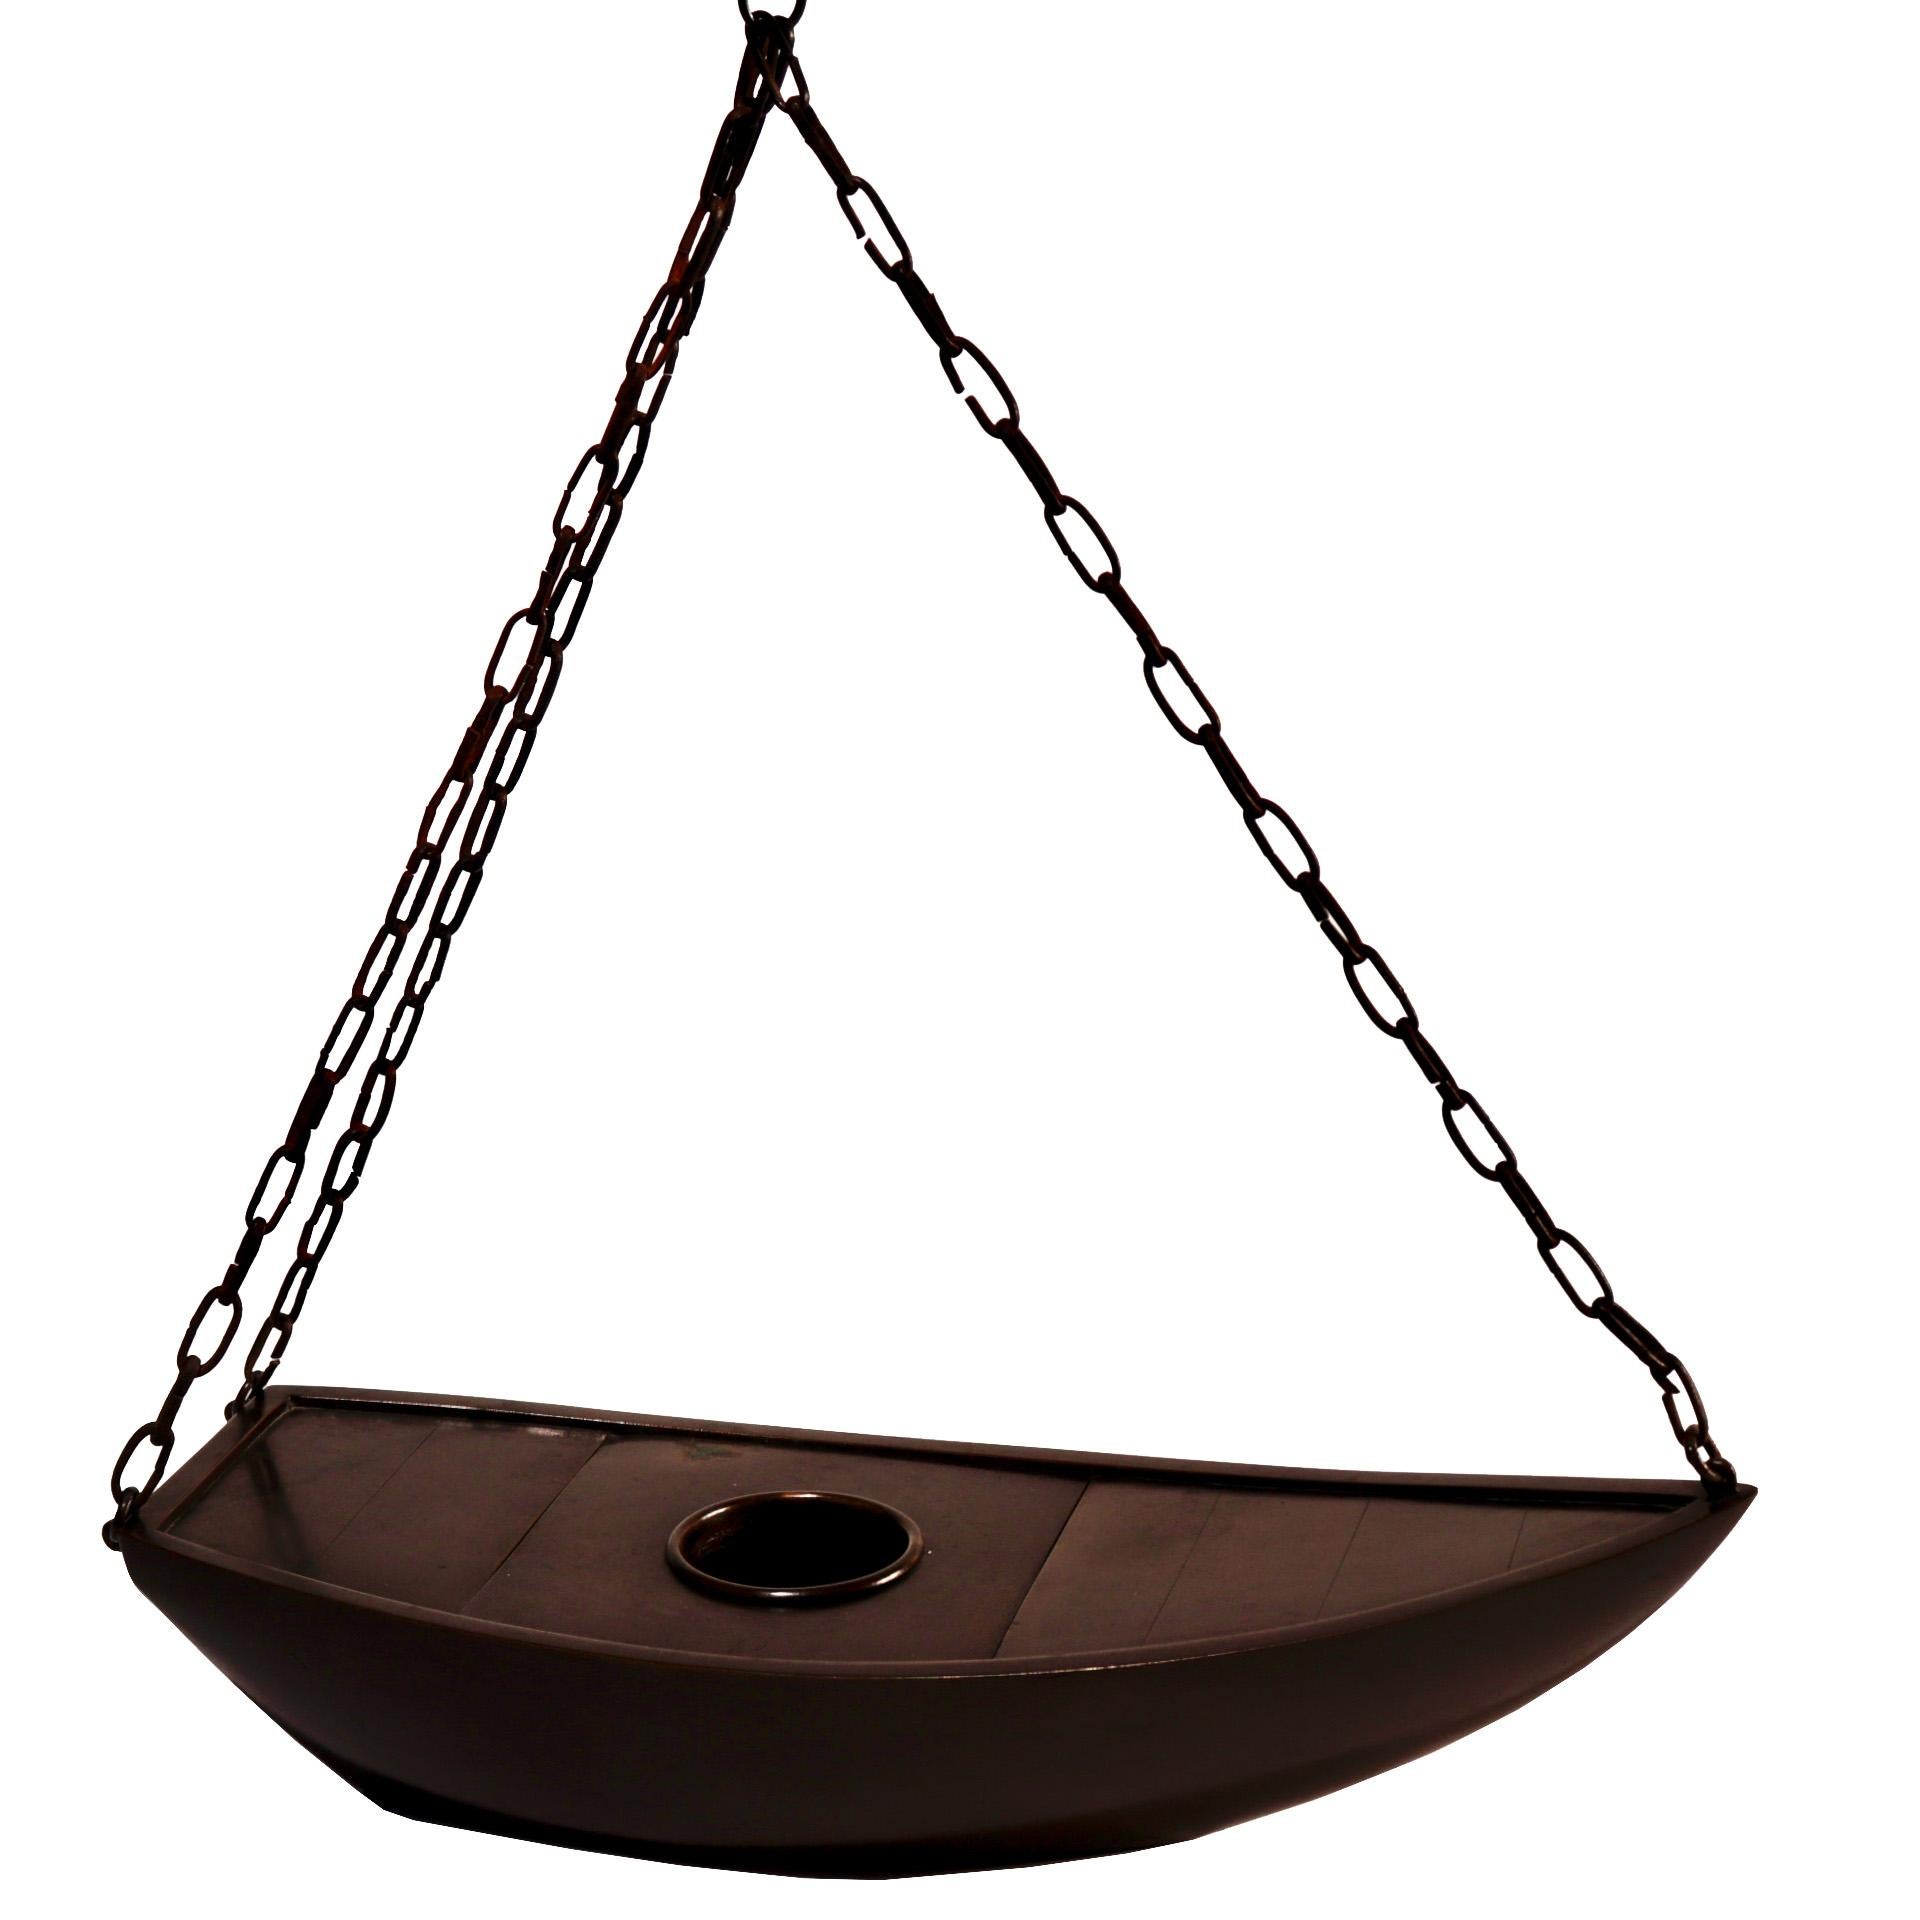 Antique Japanese bronze hanging flower arranging container in the shape of a boat, sharp angular form with flat bottom hull base and center water receptacle sitting within a removable hatch, suspended by an iron chain attached at the tip of the prow